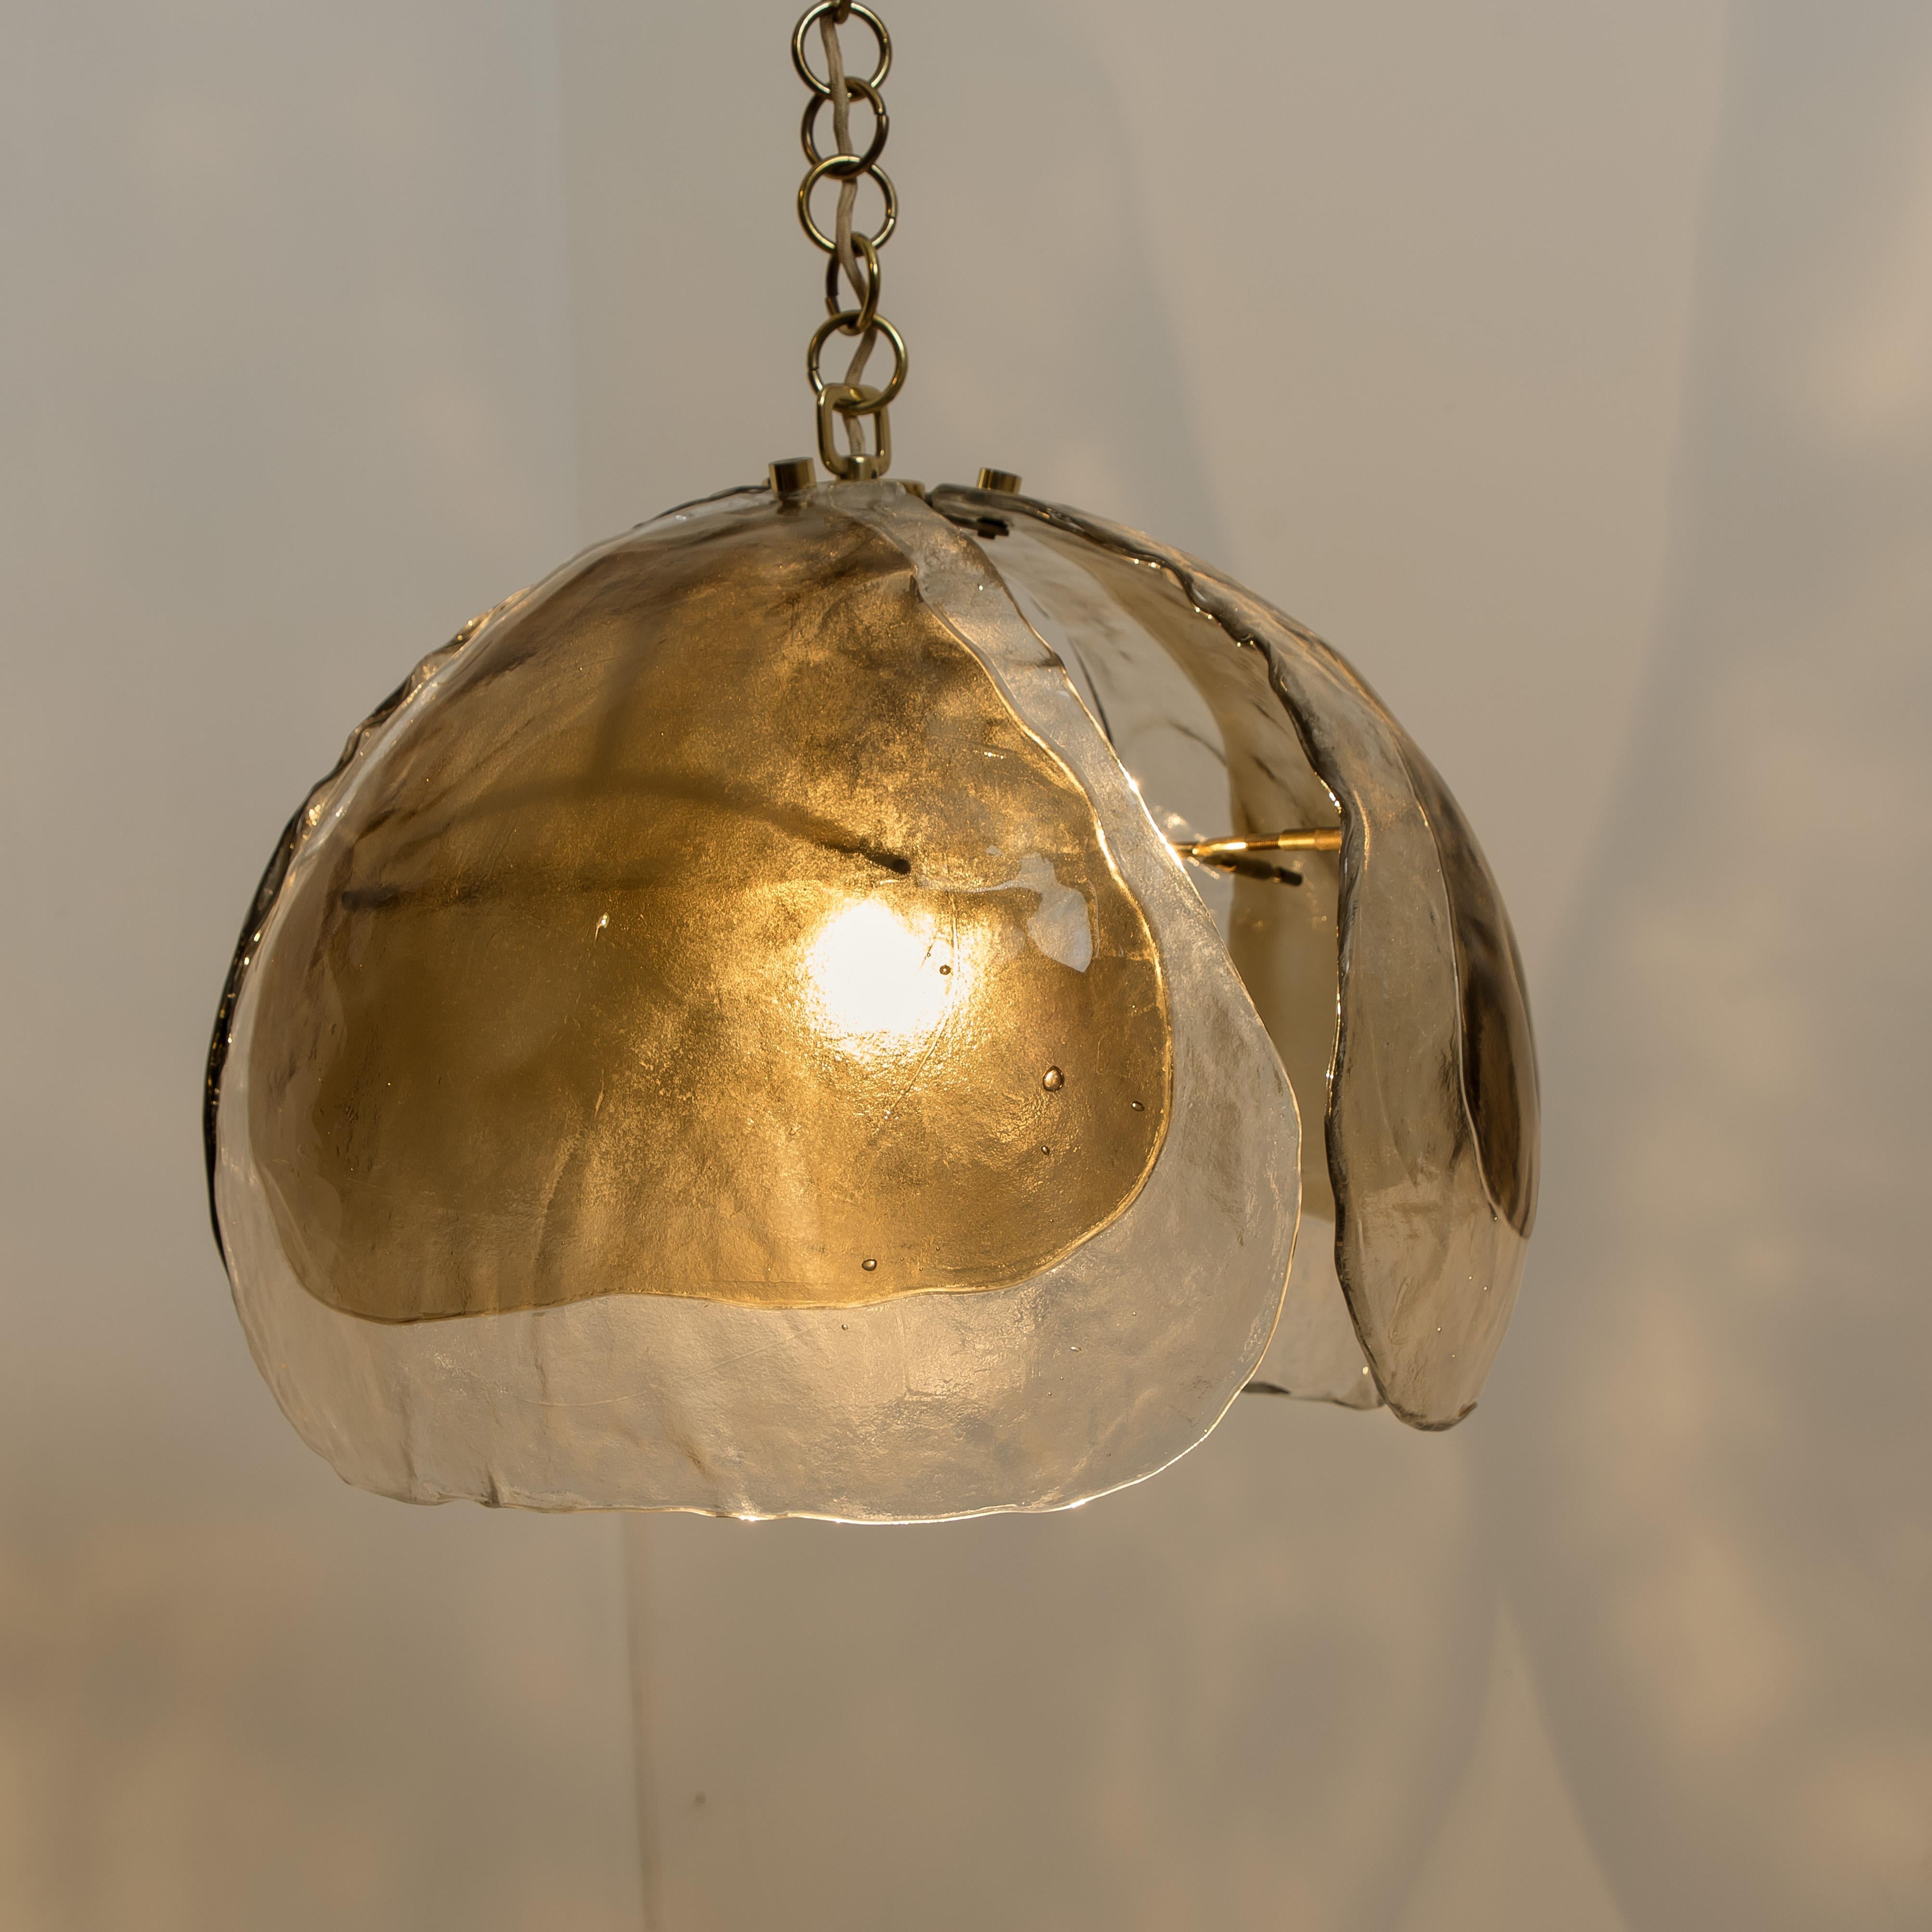 A nice pair of pendant lights in the style of Kalmar. Three smoked tone murano glasses are mounted on a brass fixture.
The hand blown leaves are refracting the light in a beautiful way. It fills the room with a soft, warm and welcoming